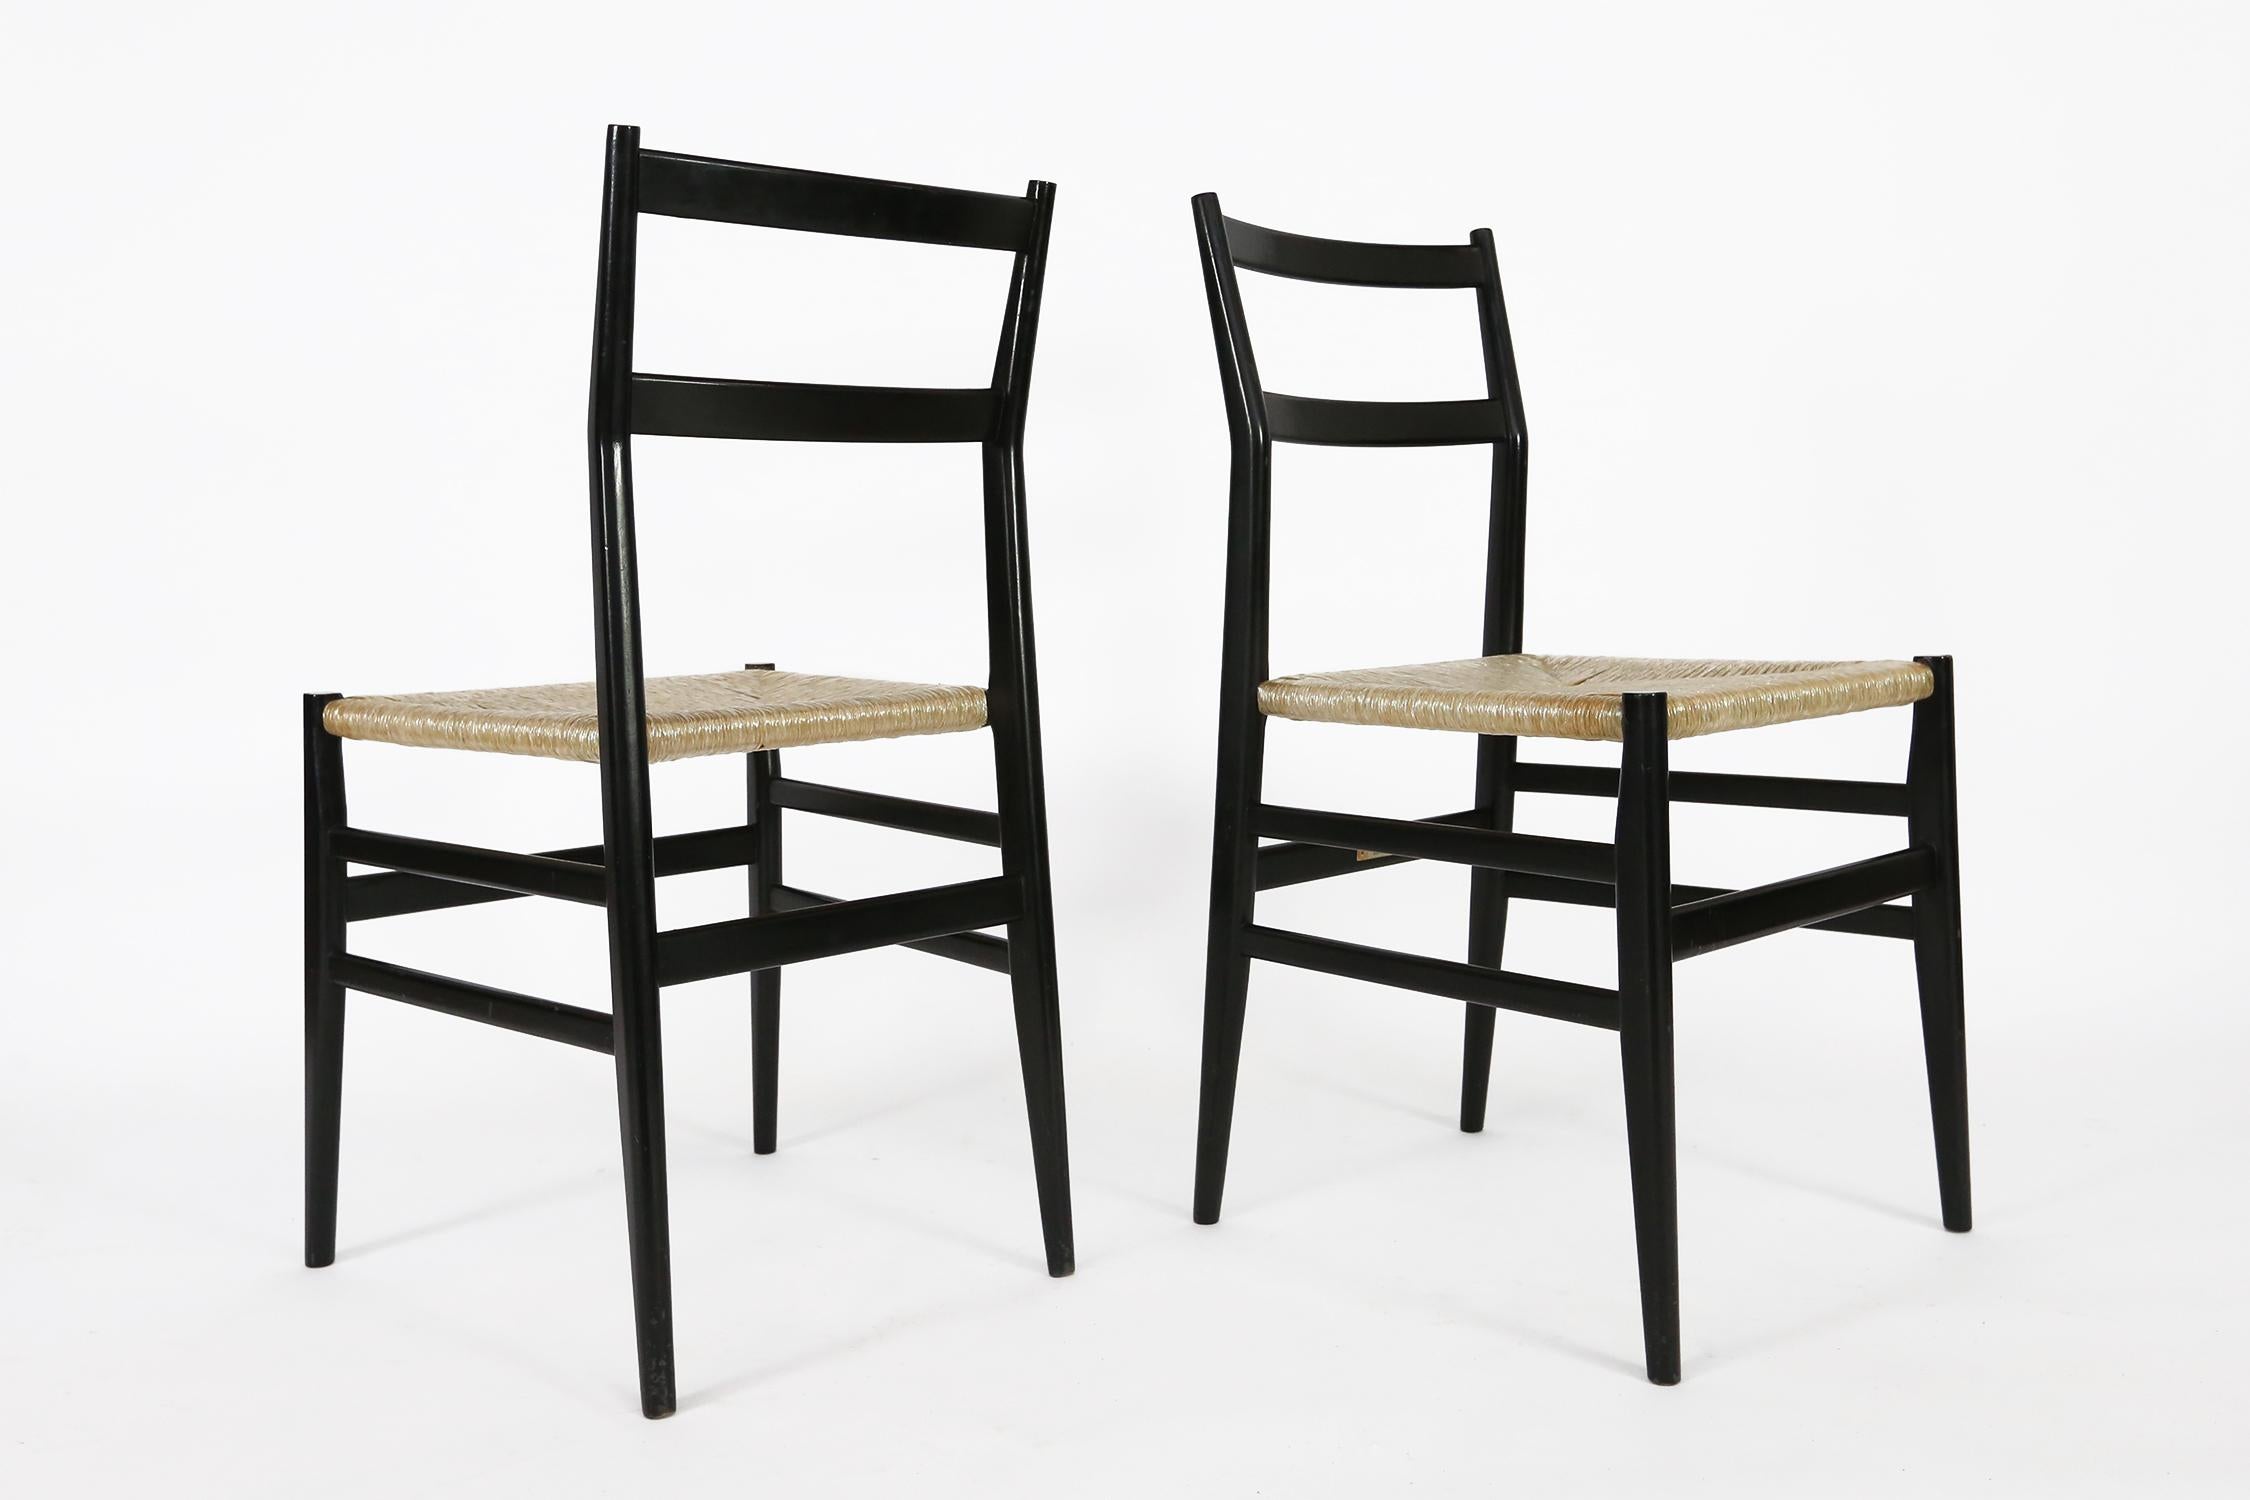 Set of 12 Gio Ponti Leggera chairs edited by Cassina, these are all 1960s editions. They are all very sturdy.
8 chairs have their original Cassina label and are in a slightly better condition of paint and canework,
4 chairs have no labels and are